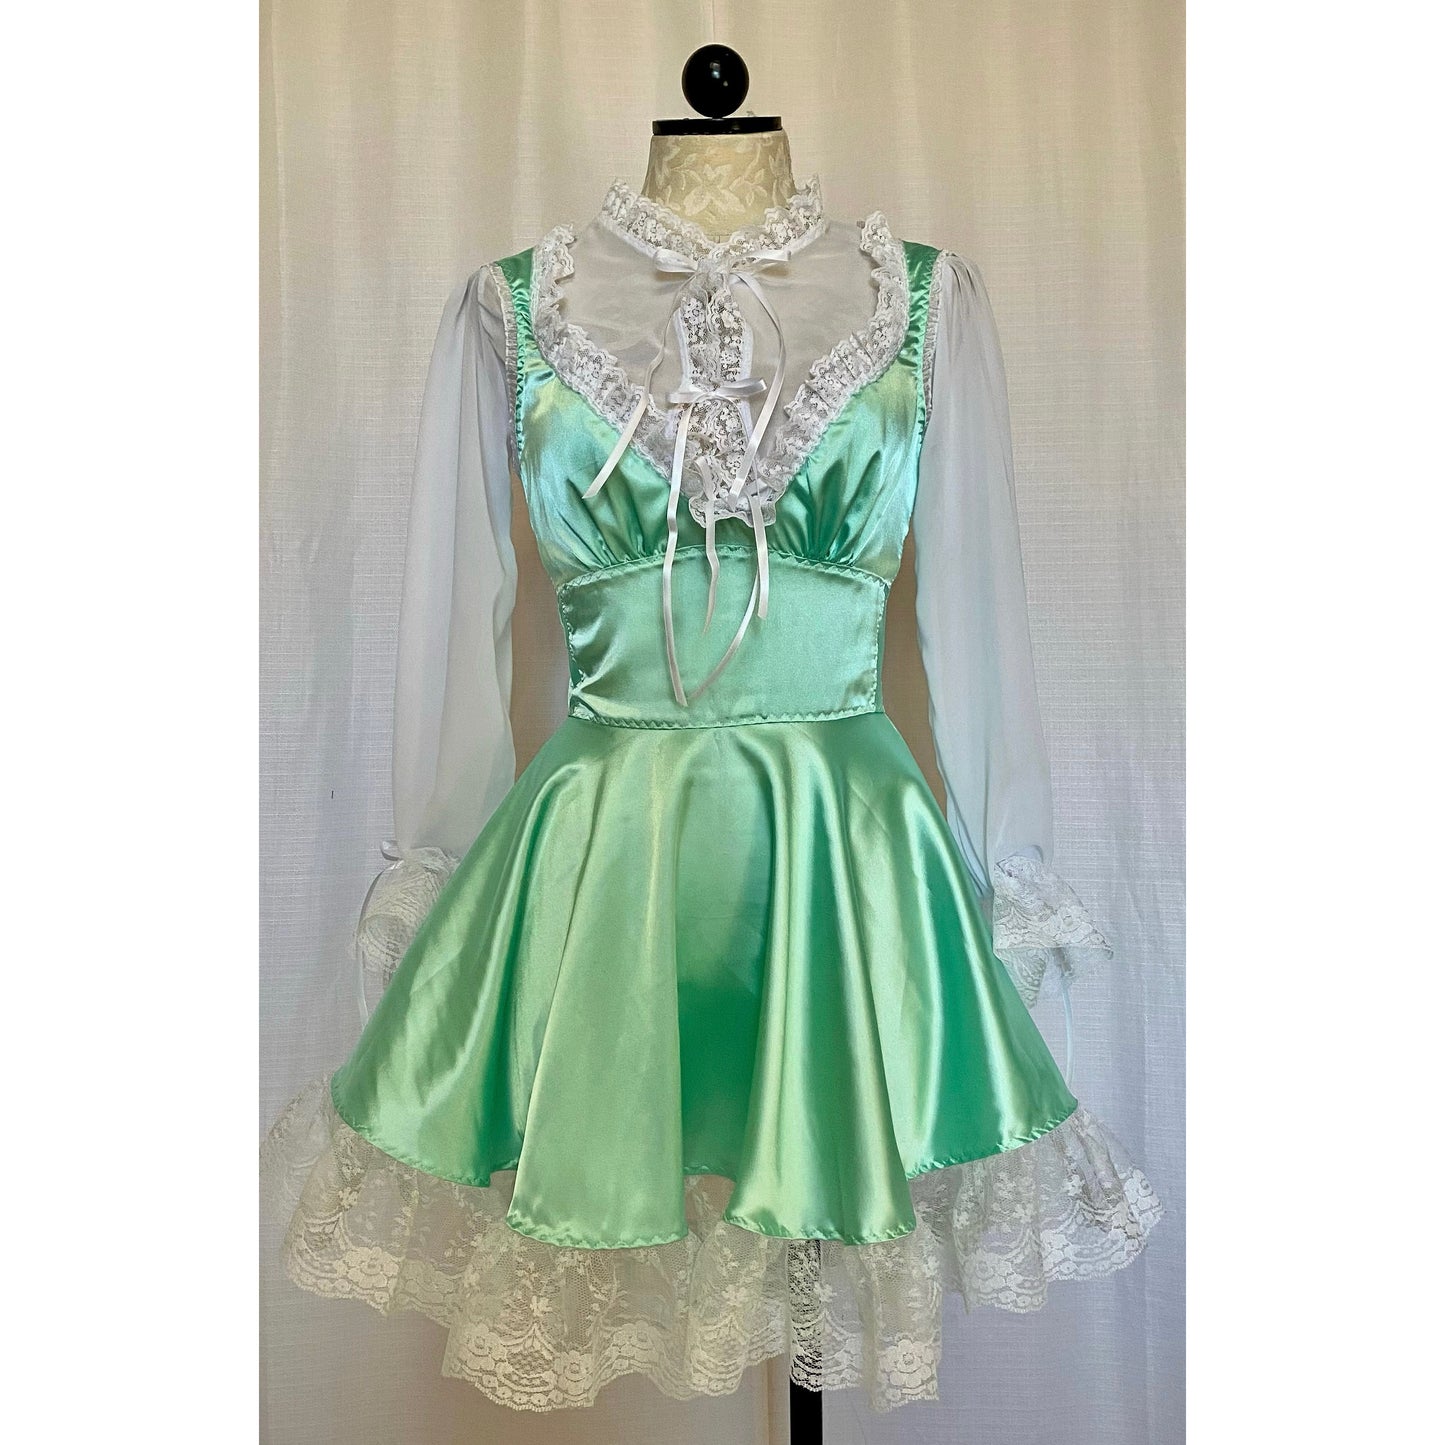 The Siouxsie Dress in Mint